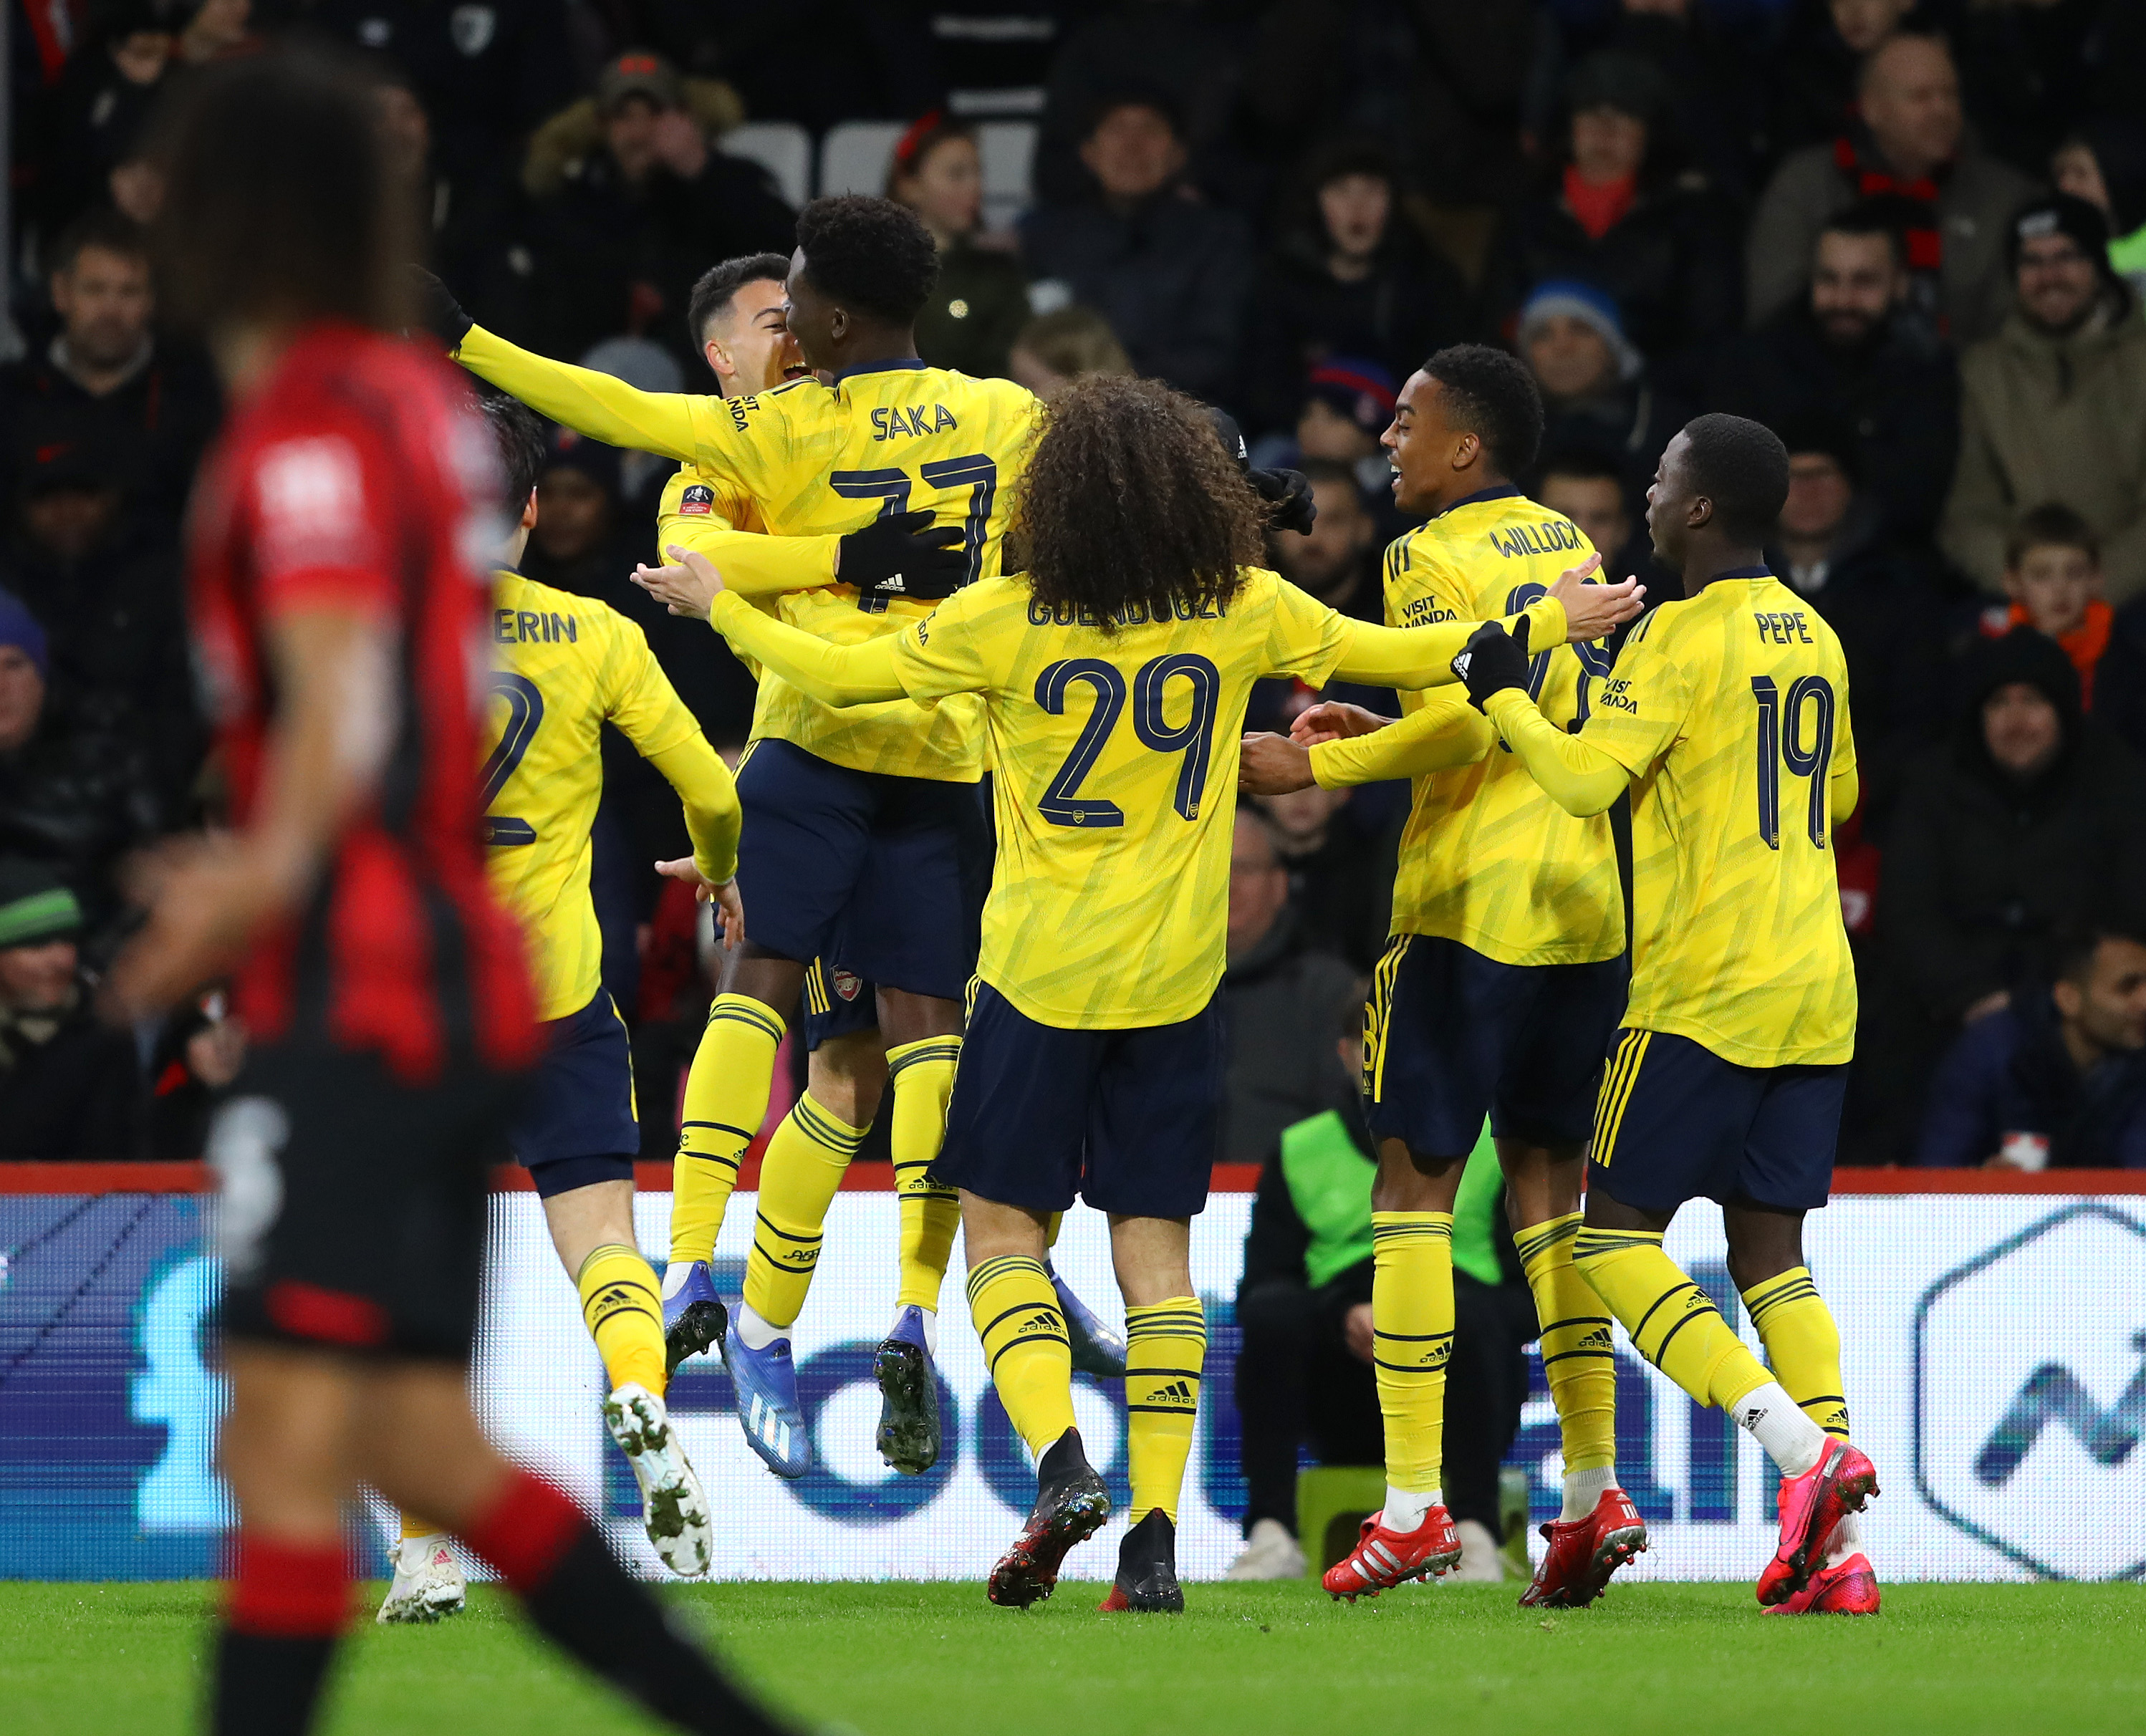 BOURNEMOUTH, ENGLAND - JANUARY 27: Bukayo Saka of Arsenal celebrates with teammates after scoring his team's first goal during the FA Cup Fourth Round match between AFC Bournemouth and Arsenal at Vitality Stadium on January 27, 2020 in Bournemouth, England. (Photo by Warren Little/Getty Images)